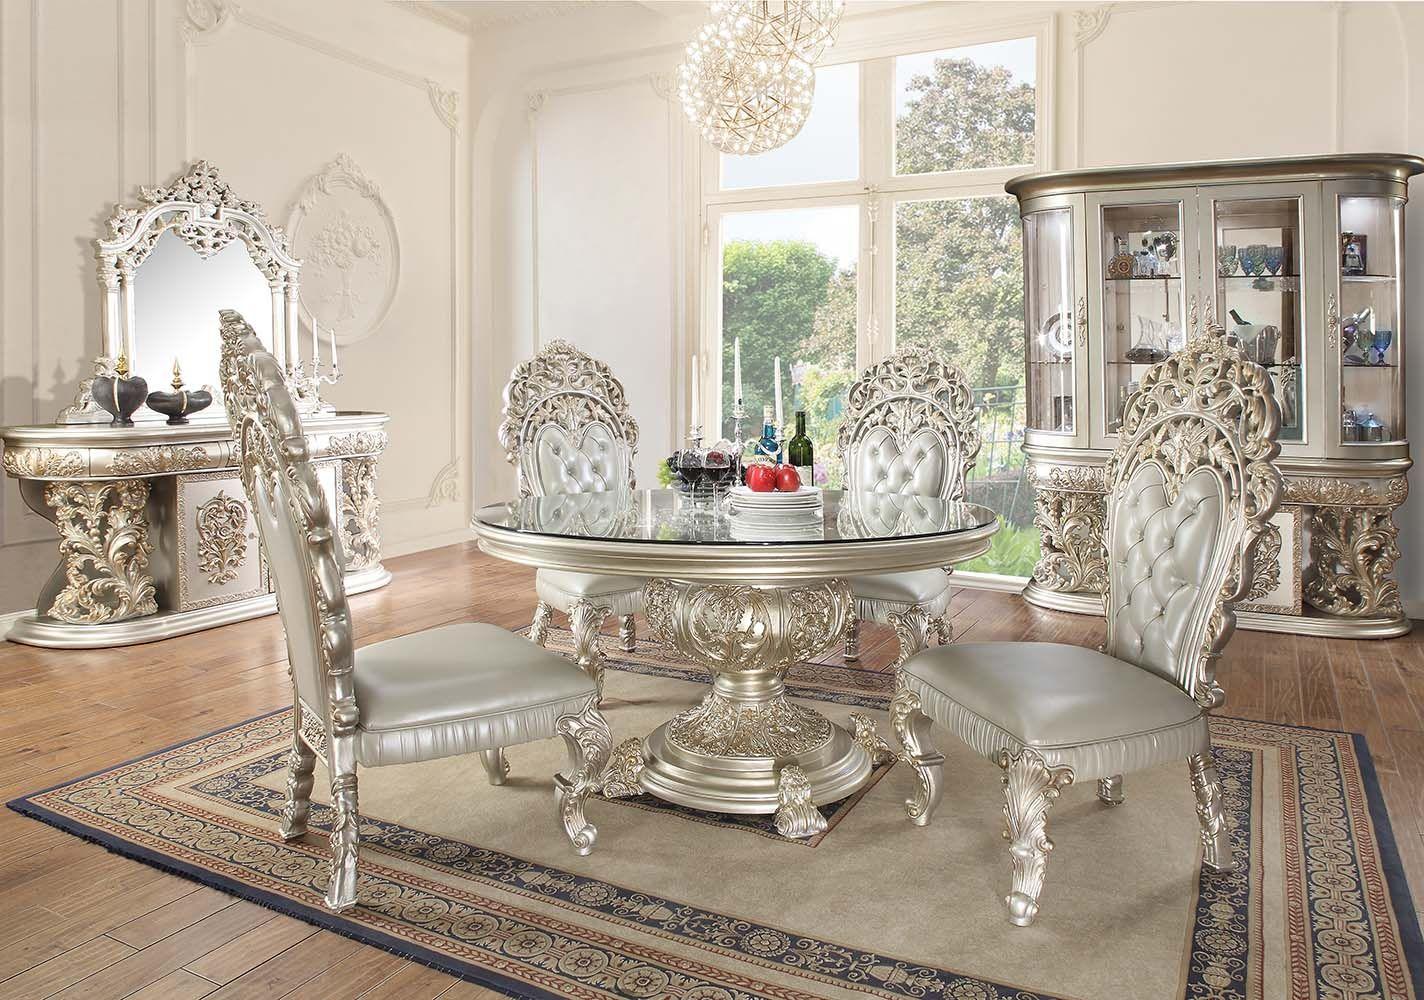 Classic Dining Room Set Sandoval Round Dining Room Set 9PCS DN01493-RTC-9PCS DN01493-RTC-9PCS in Silver PU